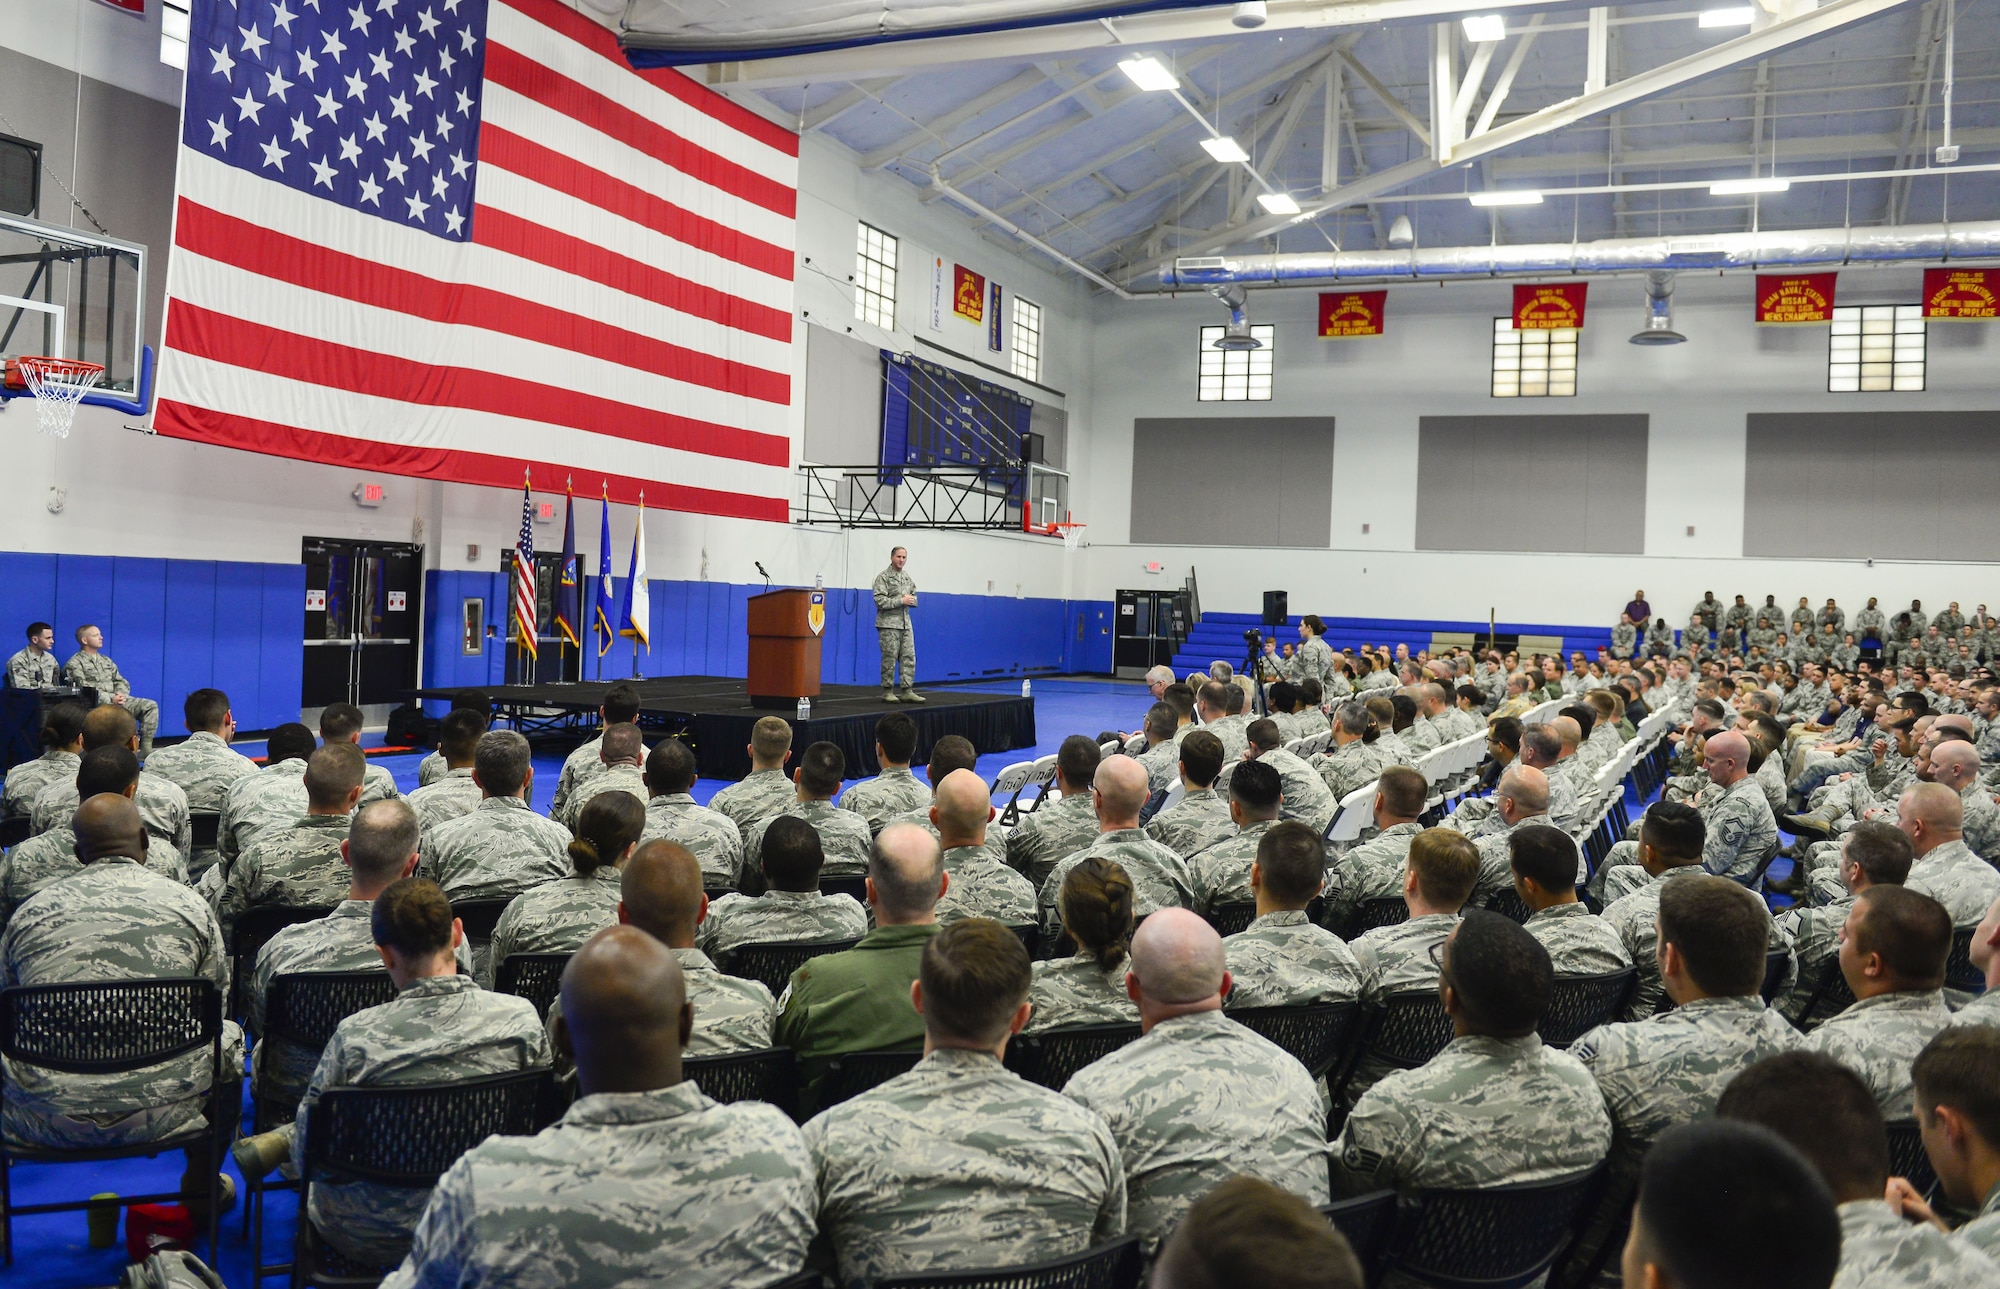 U.S. Air Force Chief of Staff Gen. David L. Goldfein speaks to uniformed and civilian Airmen during an all call at Andersen Air Force Base, Guam, Feb. 8, 2018. Goldfein shared his thoughts about the future of the Air Force and how Team Andersen's work plays a strategic role. (U.S. Air Force photo by Airman 1st Class Christopher Quail)